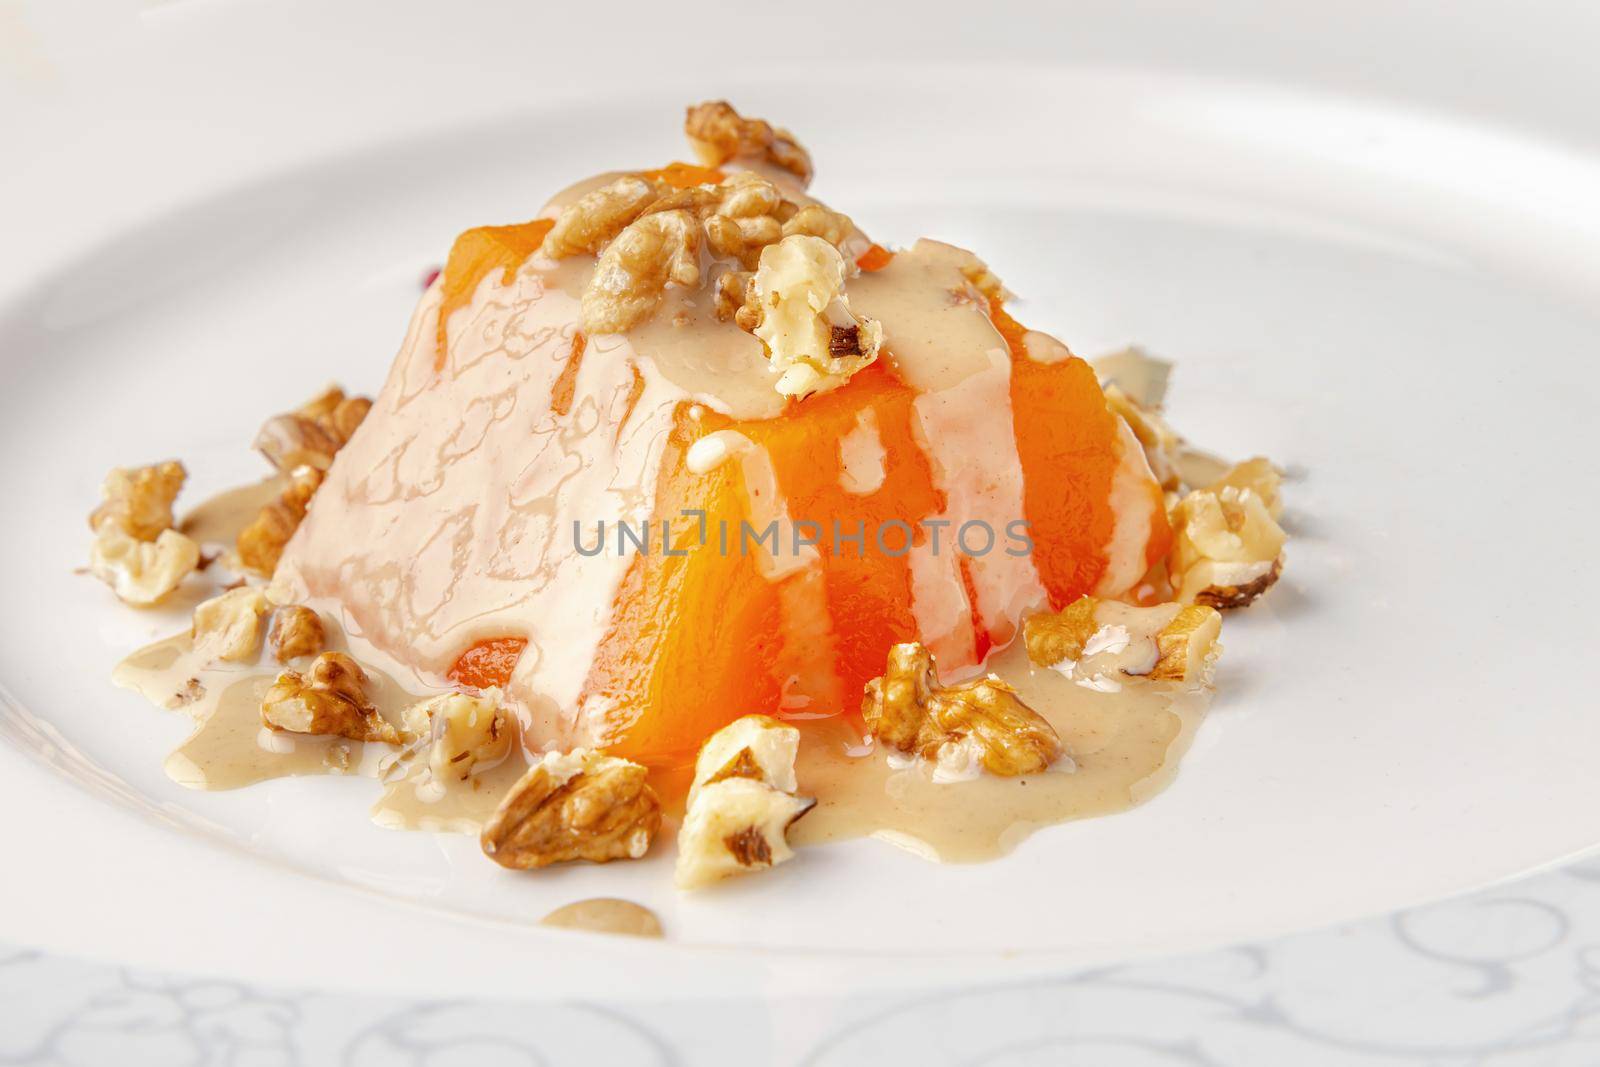 Traditional pumpkin dessert with tahini and walnuts on a white porcelain plate by Sonat